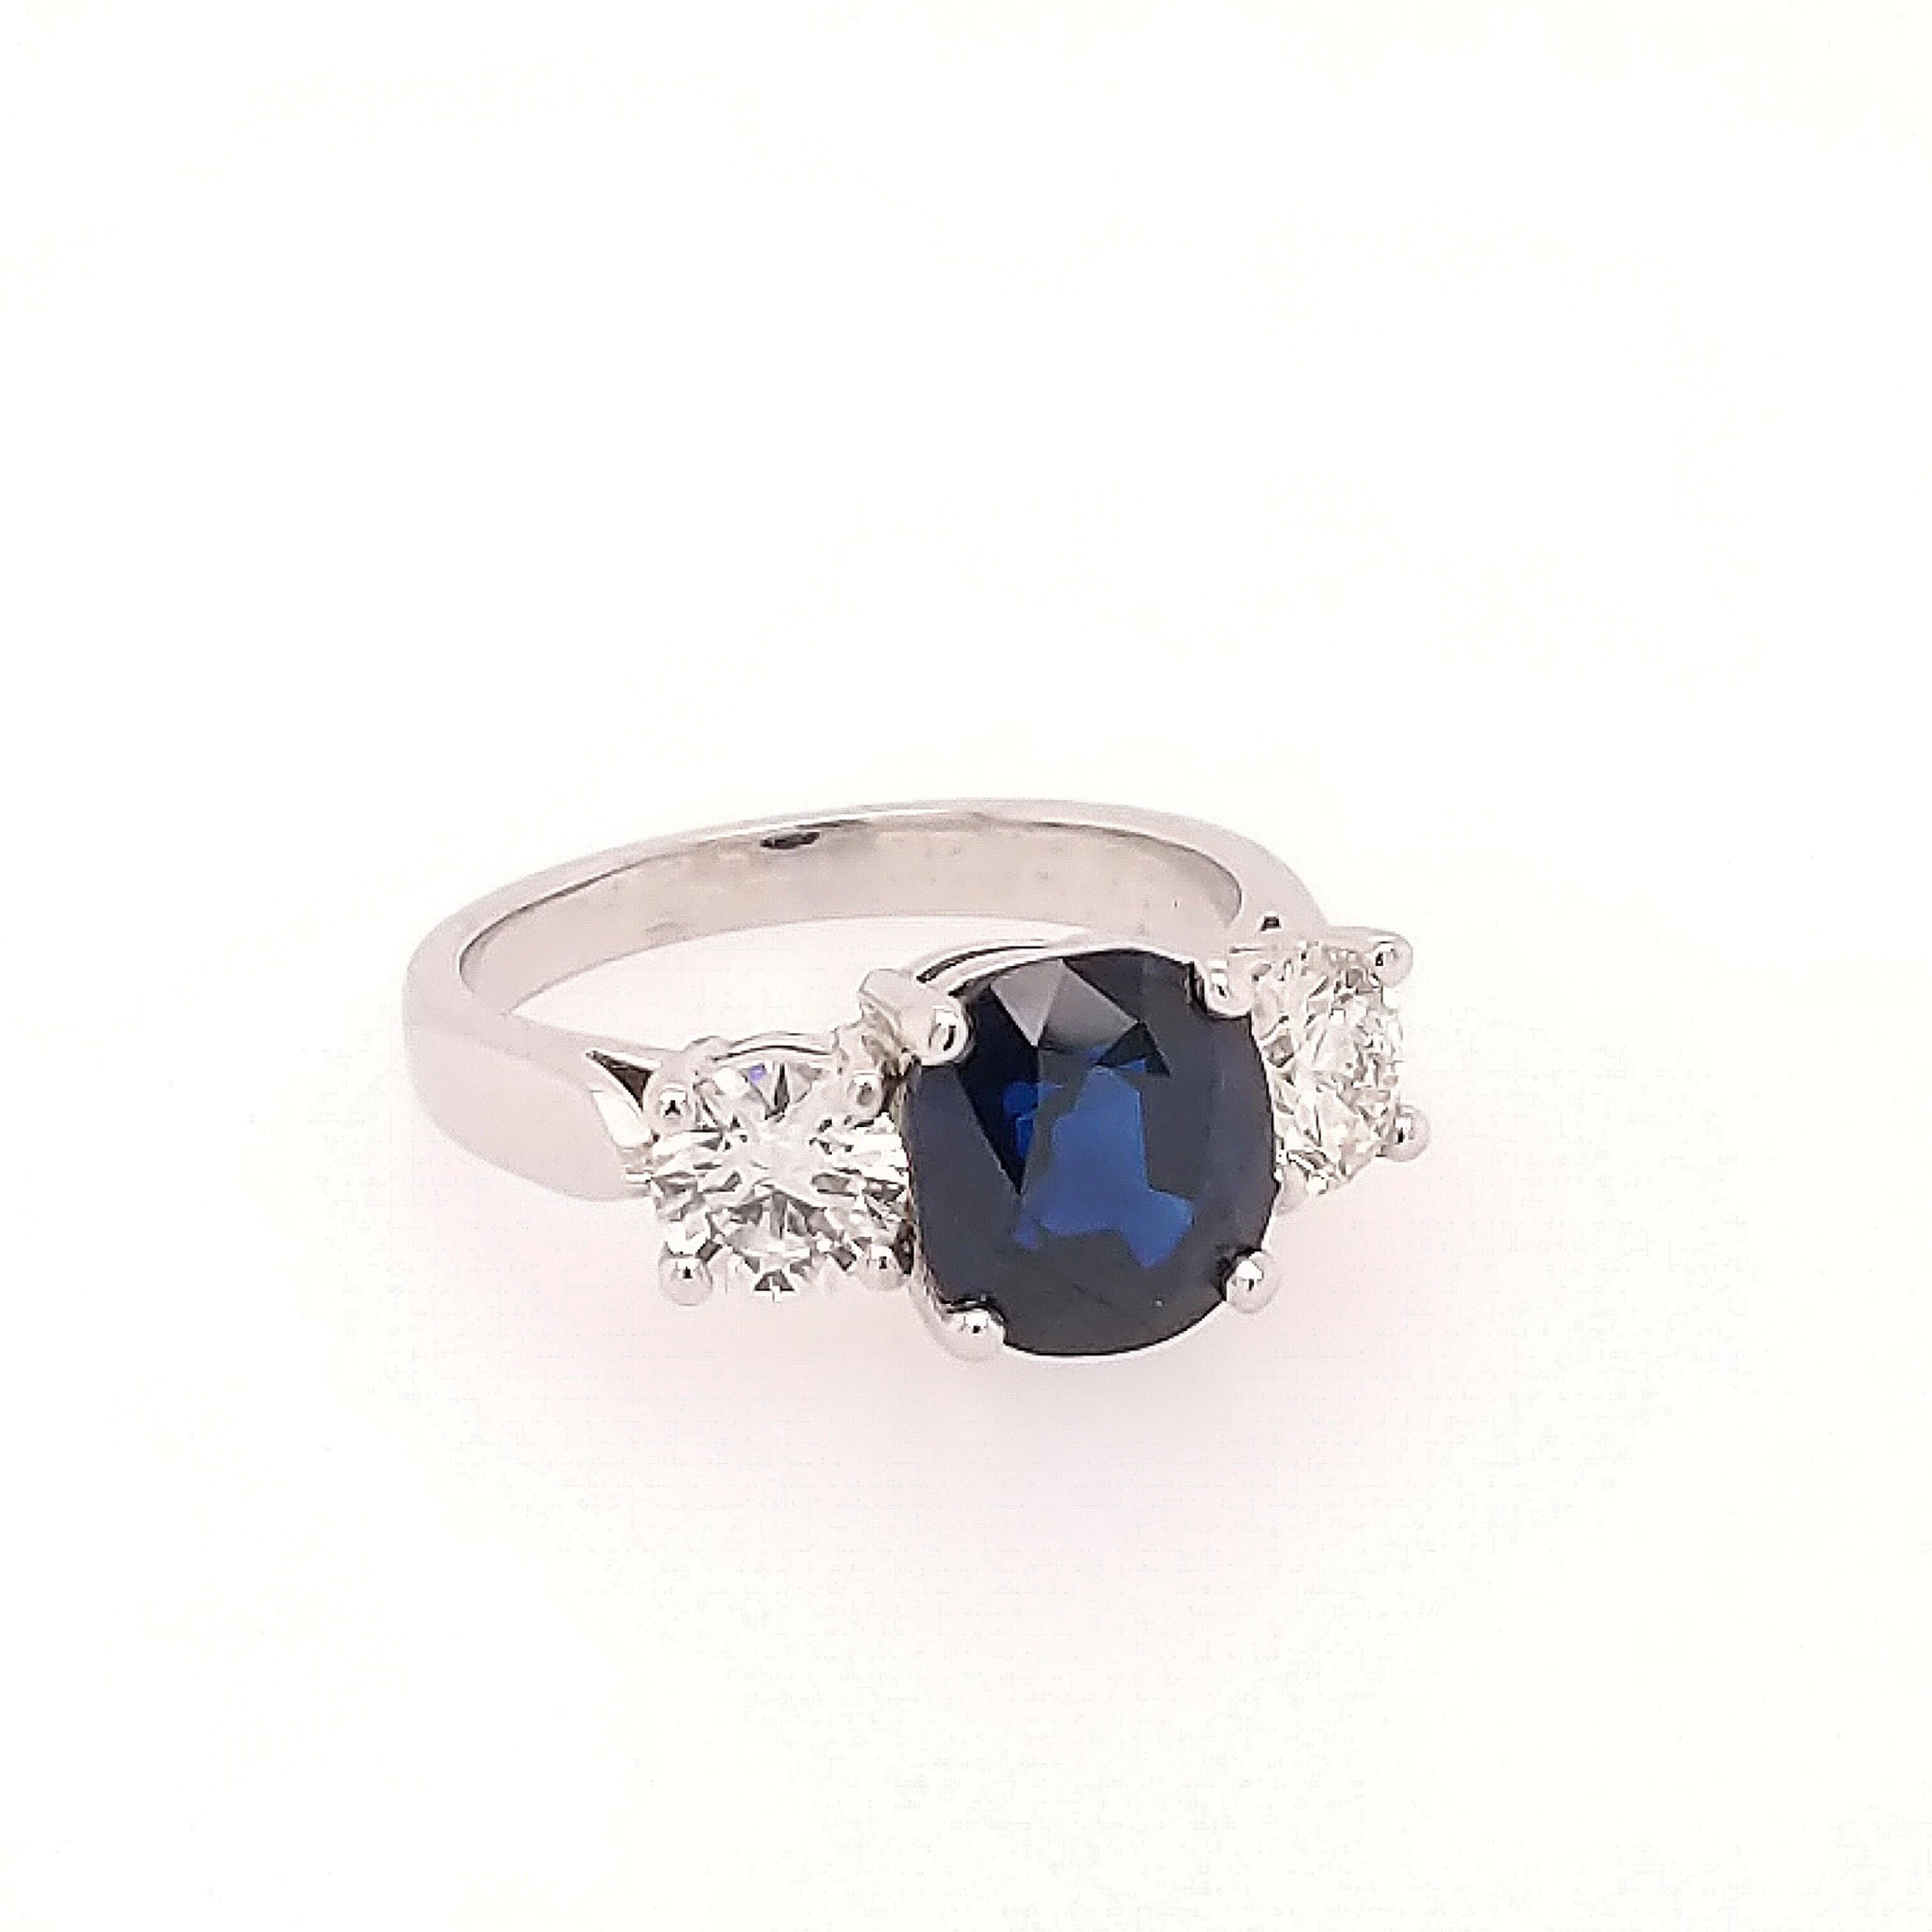 This classic 3 stone sapphire and diamond ring is crafted in 18k white gold featuring (1) oval sapphire weighing 3.32ct with a medium dark blue color. The center stone is flanked by (2) round diamonds weighing 1.03cttw with a color of H/I and a